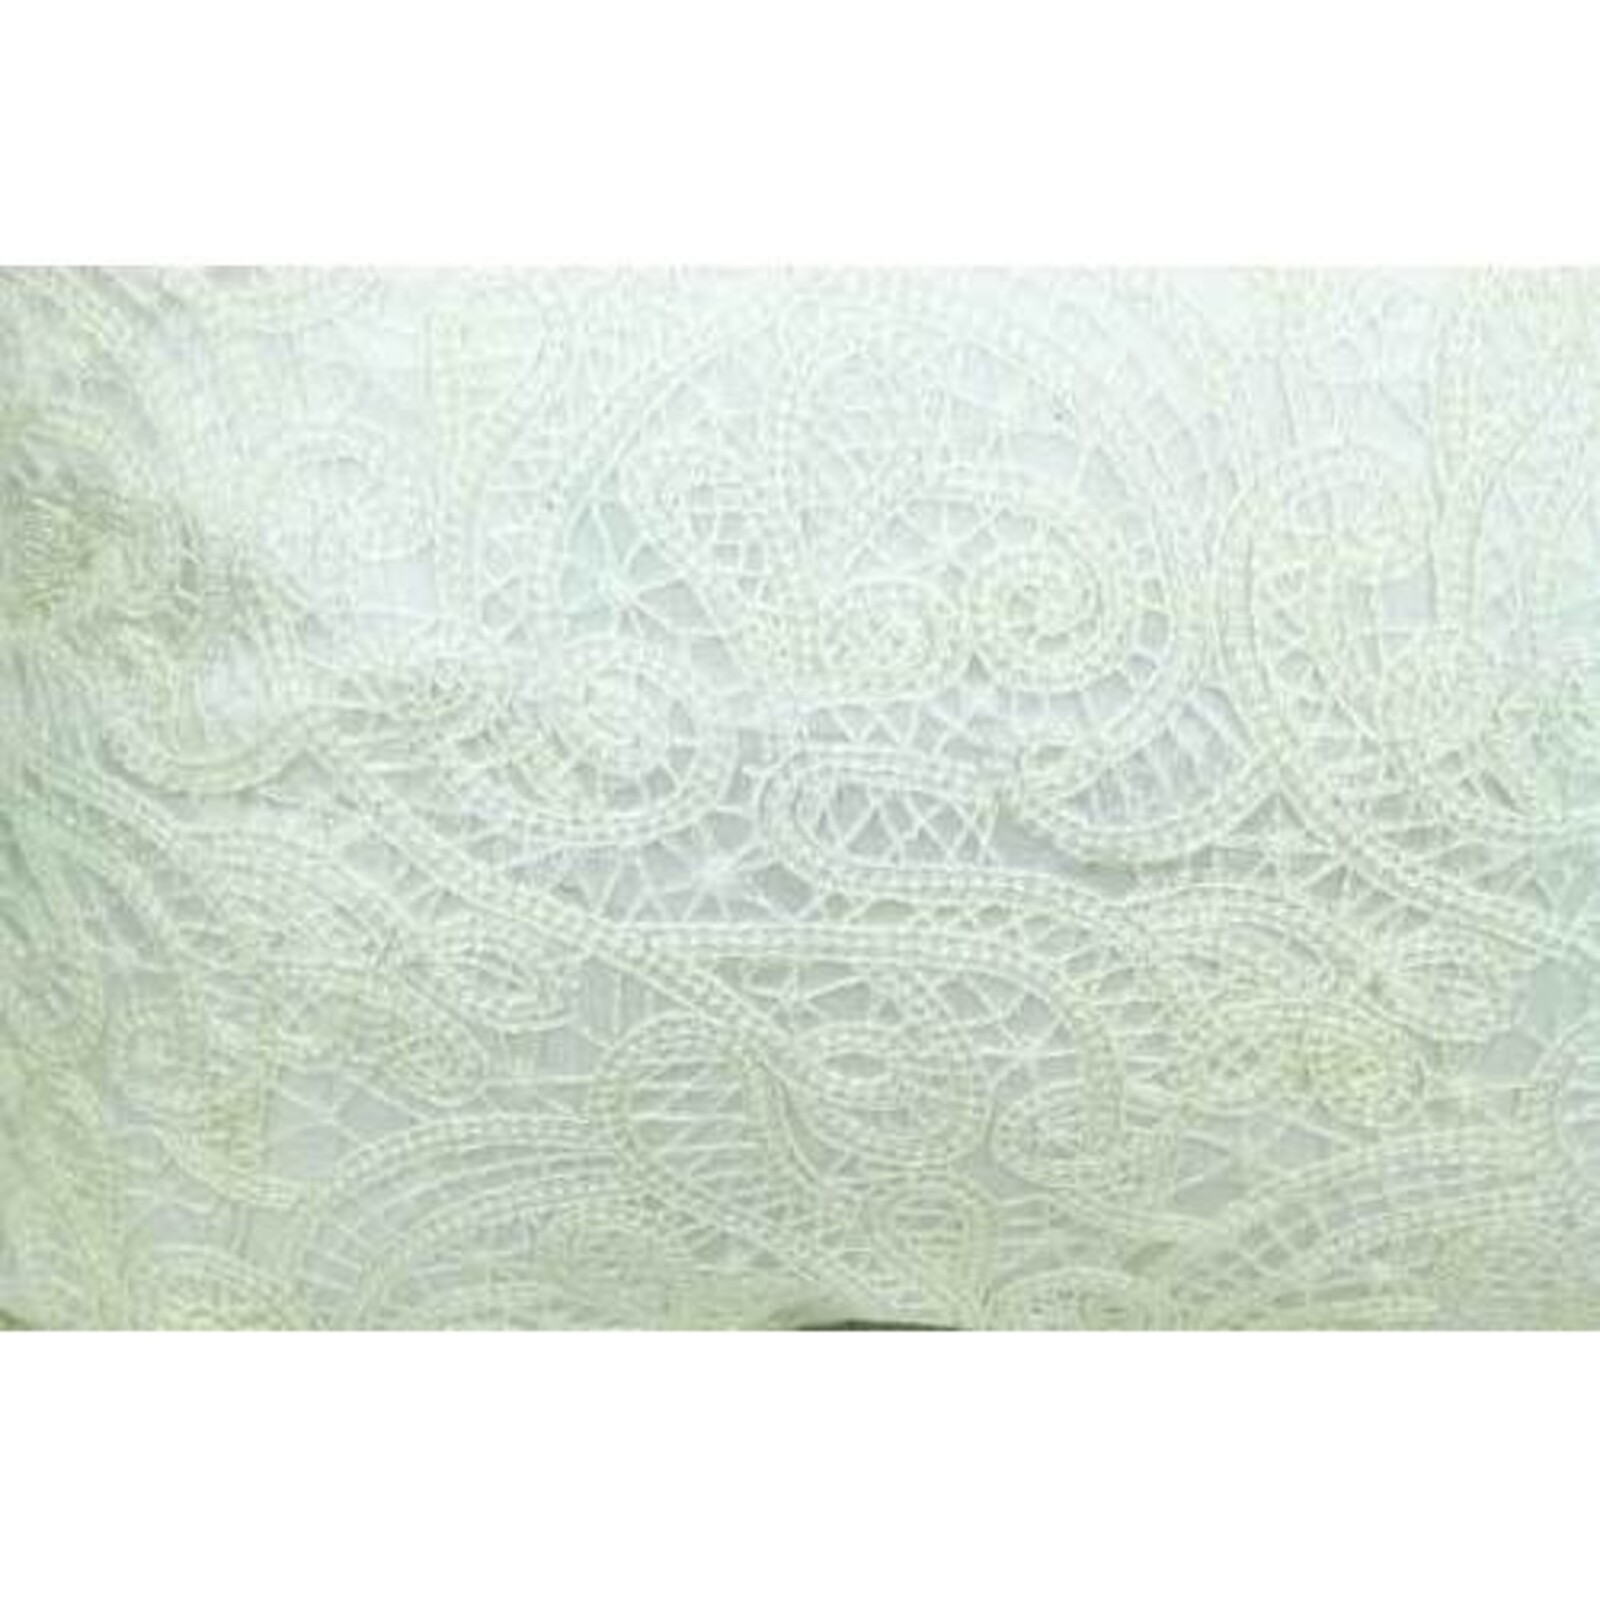 Table Runner Cream Lace